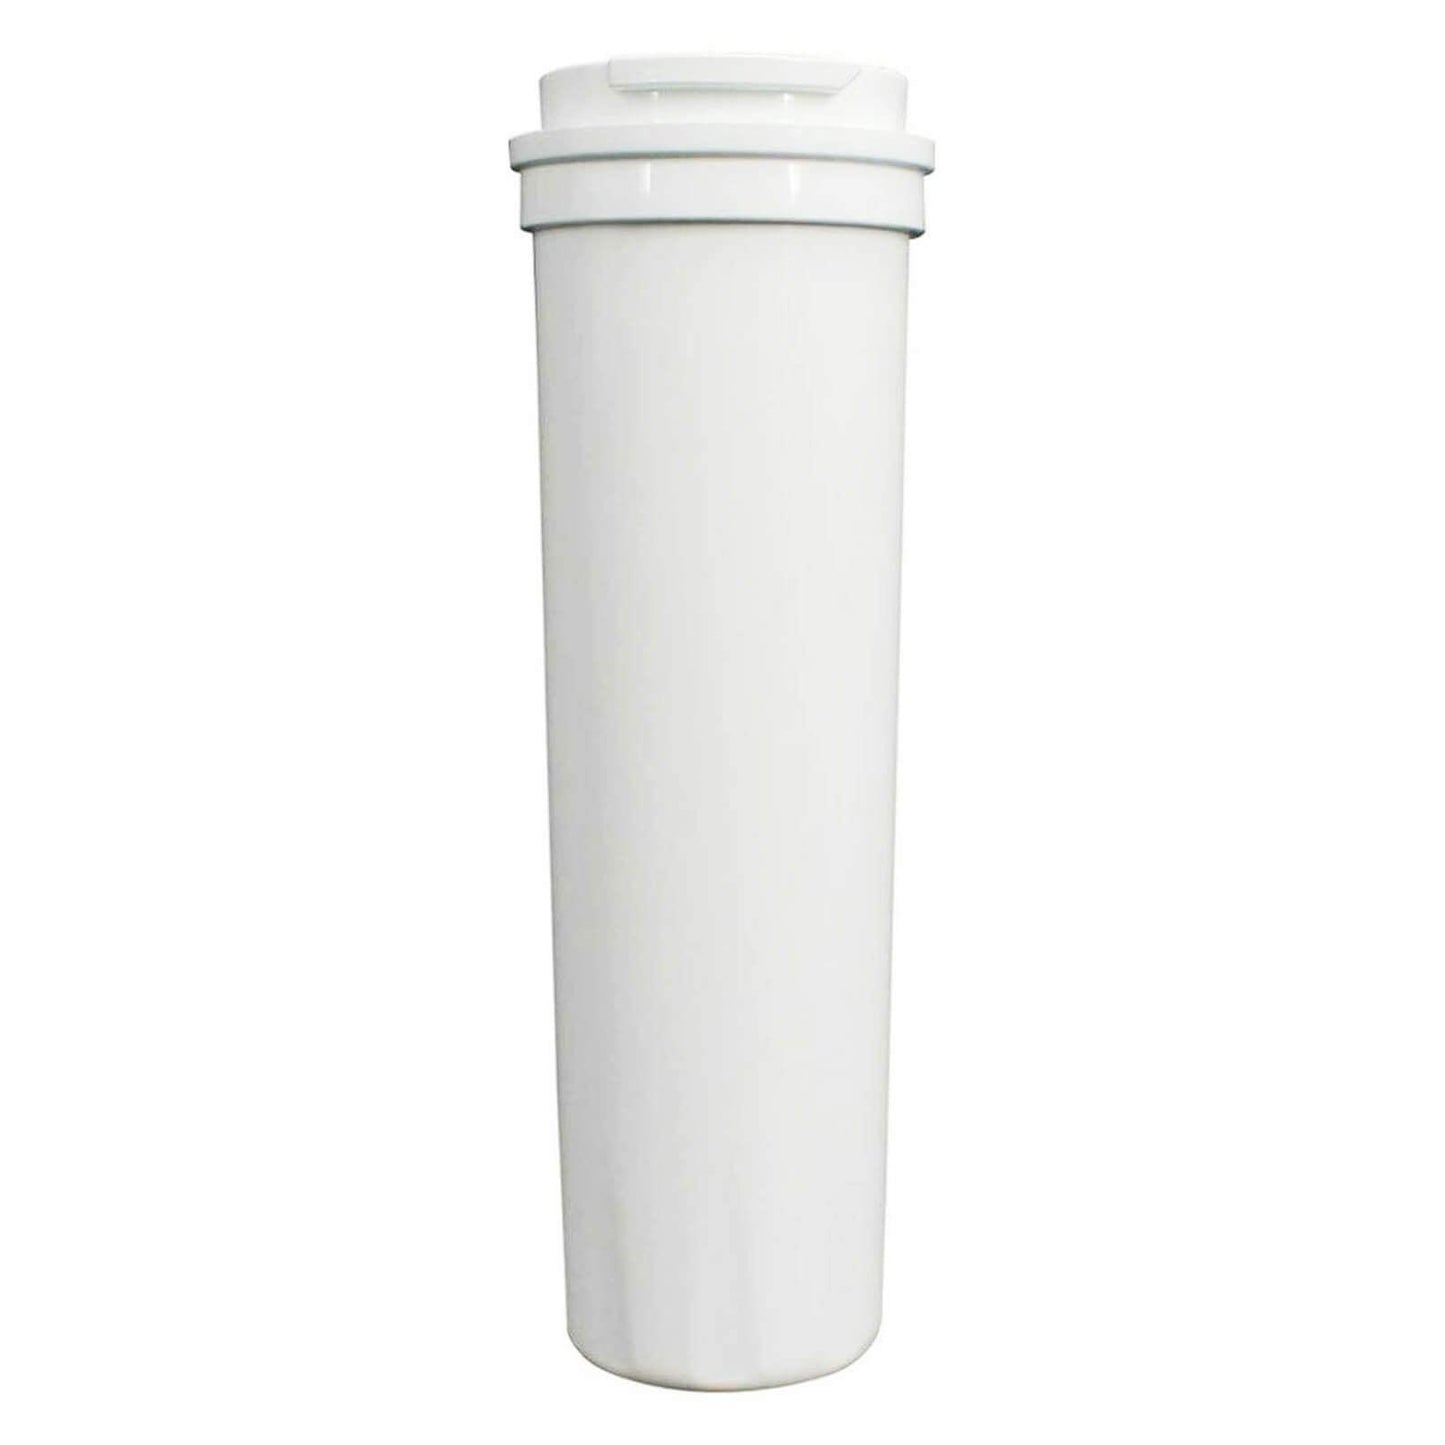 Fridge Water Filters For Fisher & Paykel 836848 Aquaport AQP-FF17 Sparesbarn